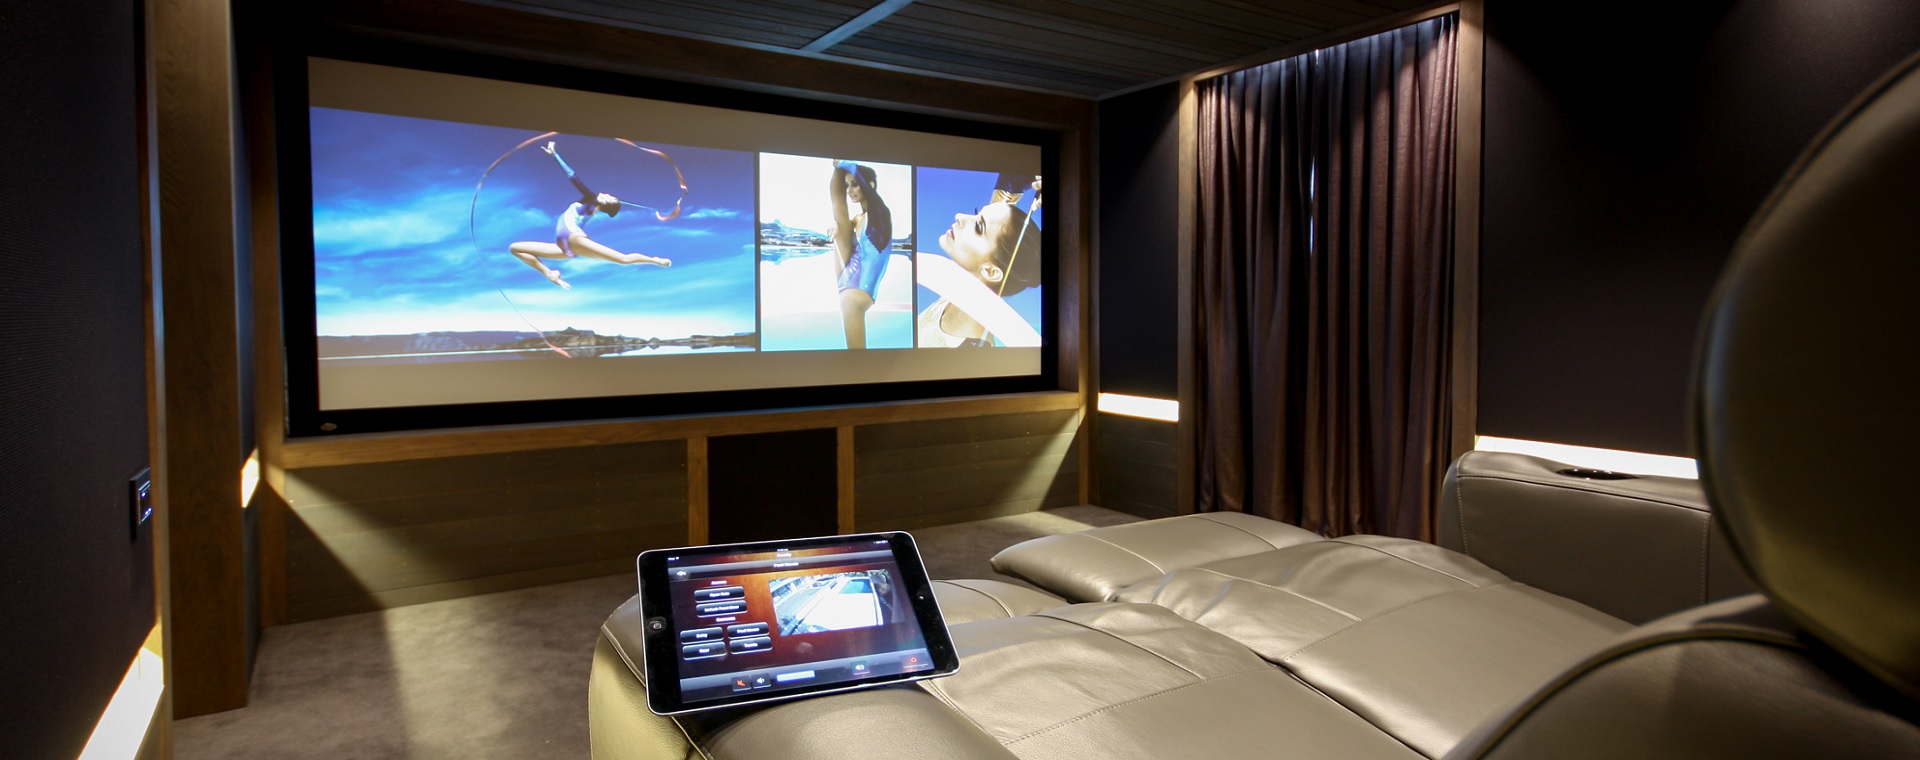 Home theatre with cinema style reclining chairs and touchscreen control of home entertainment